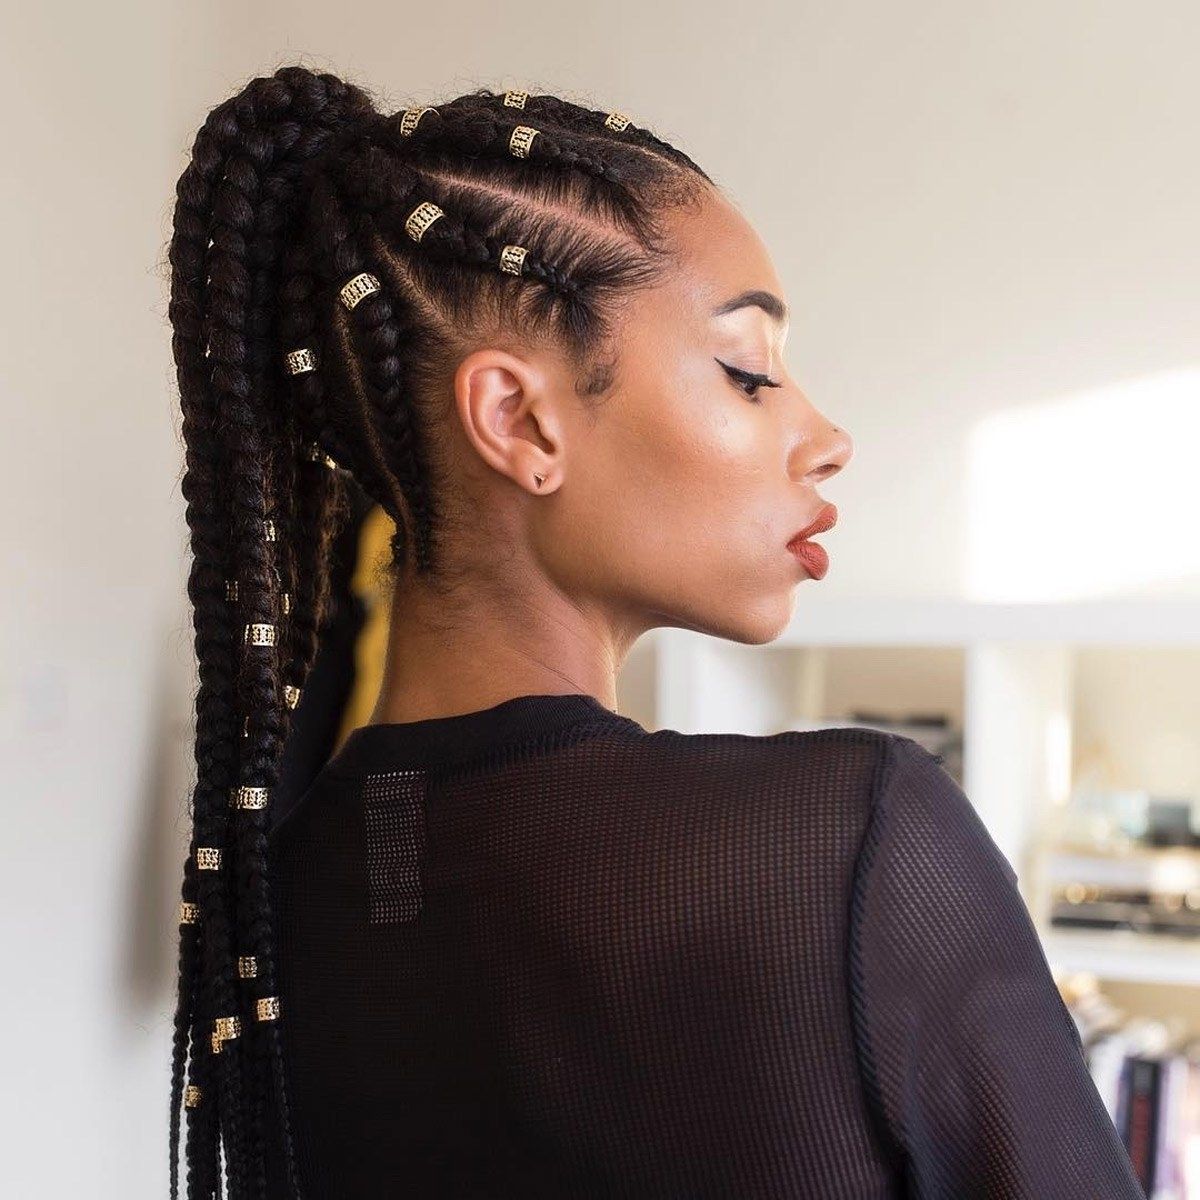 Most Current Side Braided Sleek Pony Hairstyles Throughout 27 Ponytail Hairstyles For 2018: Best Ponytail Styles (View 5 of 20)